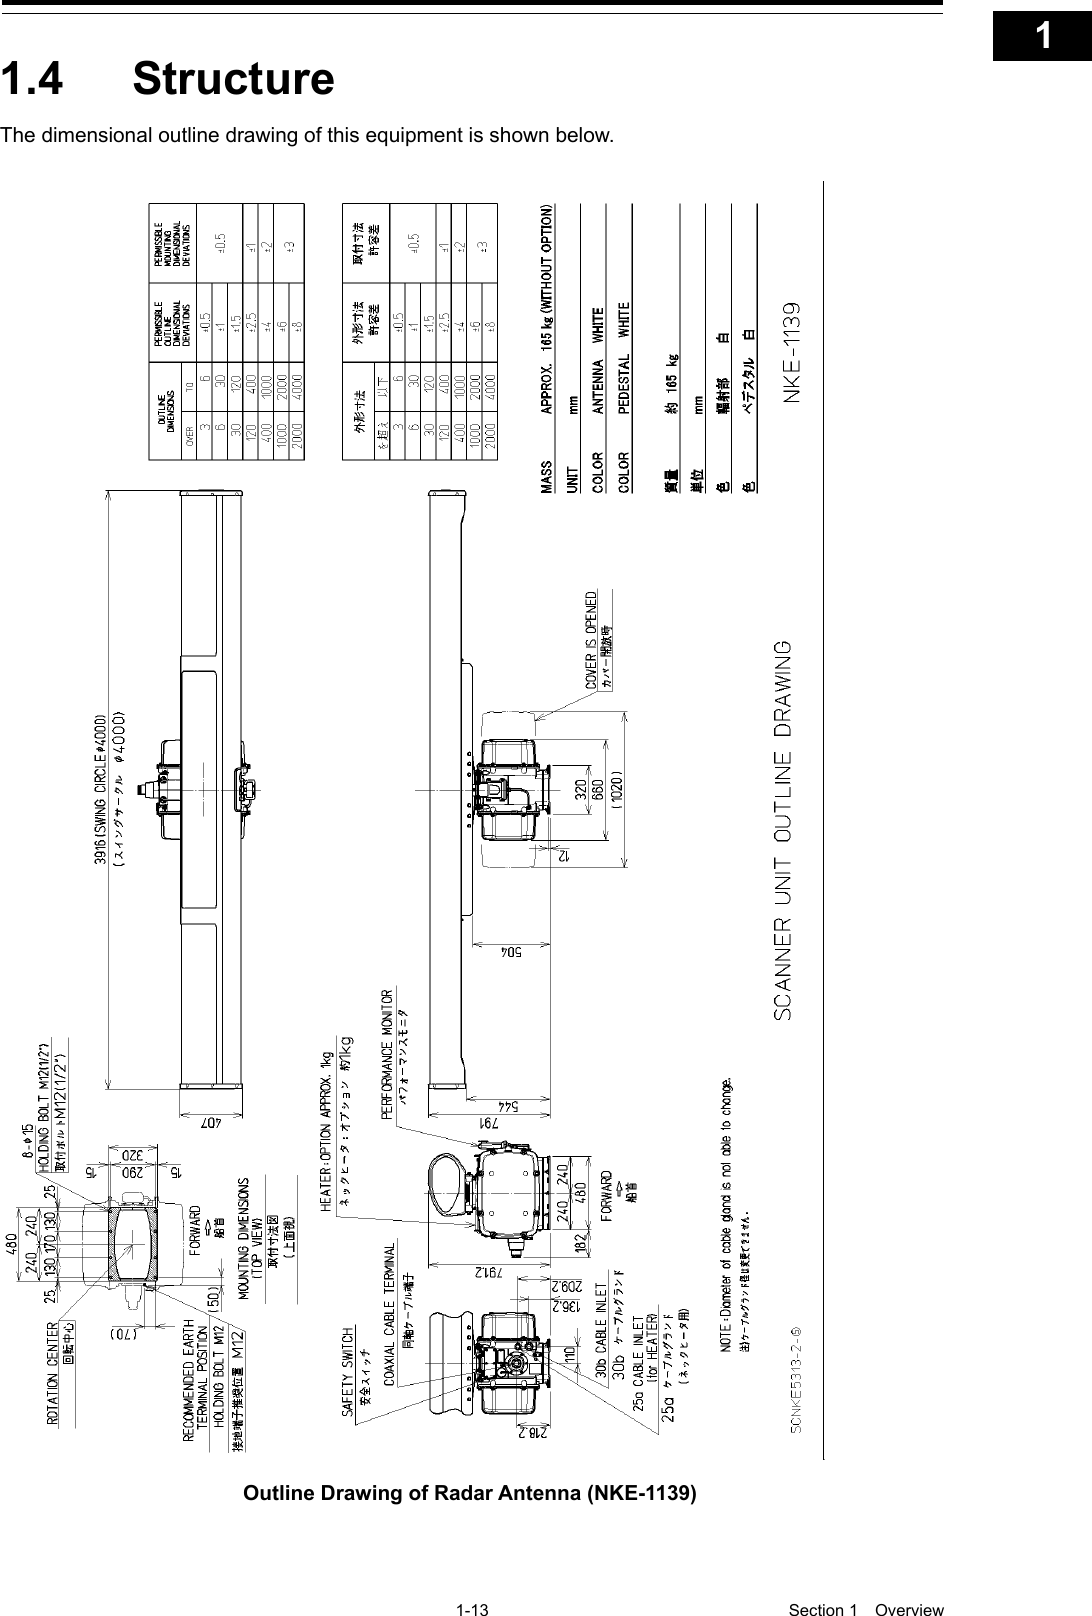   1-13  Section 1  Overview    1  2  3  4  5  6  7  8  9  10  11  12  13  14  15  16  17  18  19  20  21  22  23  24  25  26  27  付録    1.4  Structure The dimensional outline drawing of this equipment is shown below.   Outline Drawing of Radar Antenna (NKE-1139)  